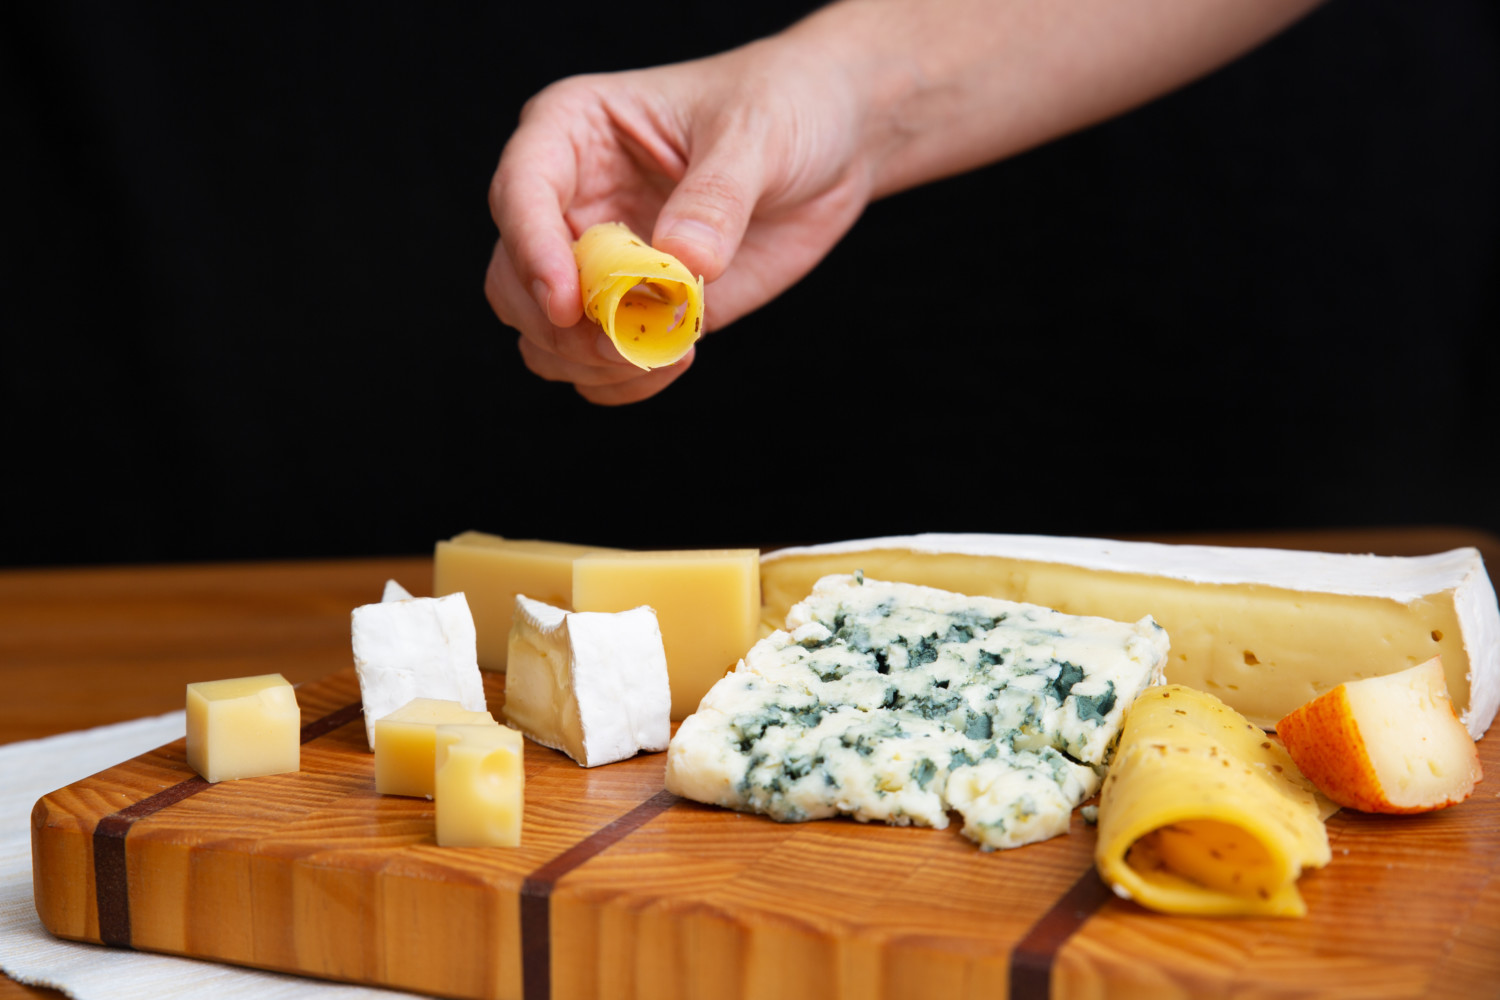 Hand takes cheese from board